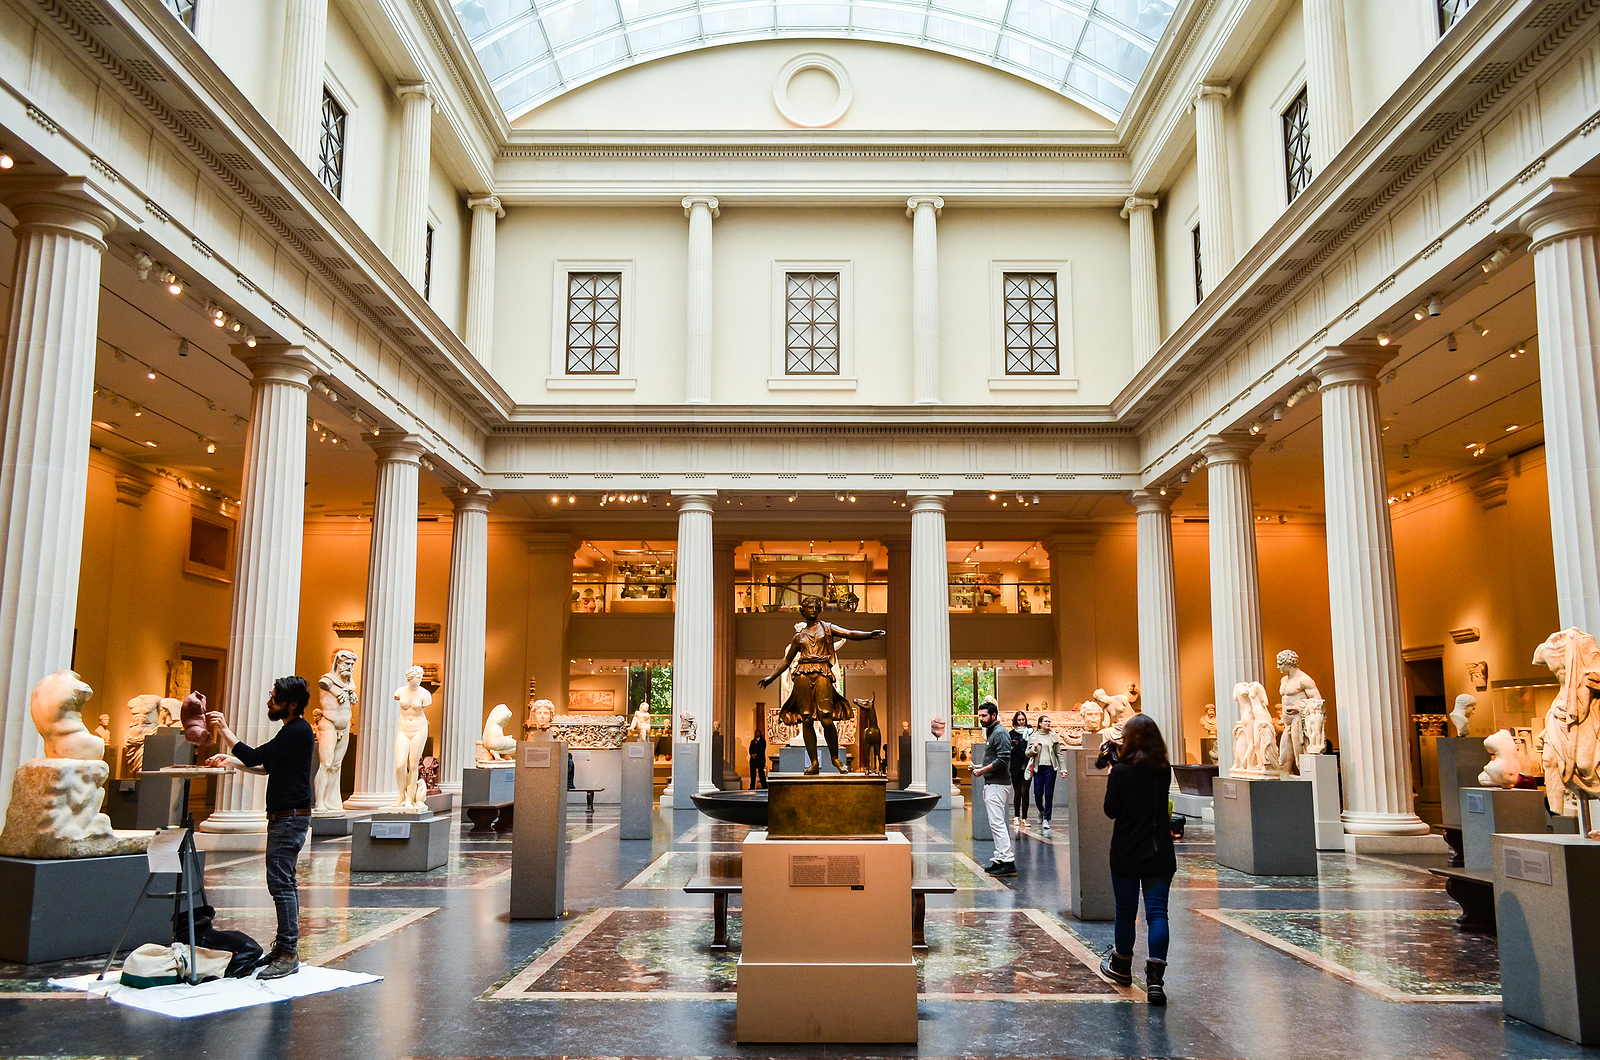 Top 5 Best Museums in New York City You Will Want to Visit